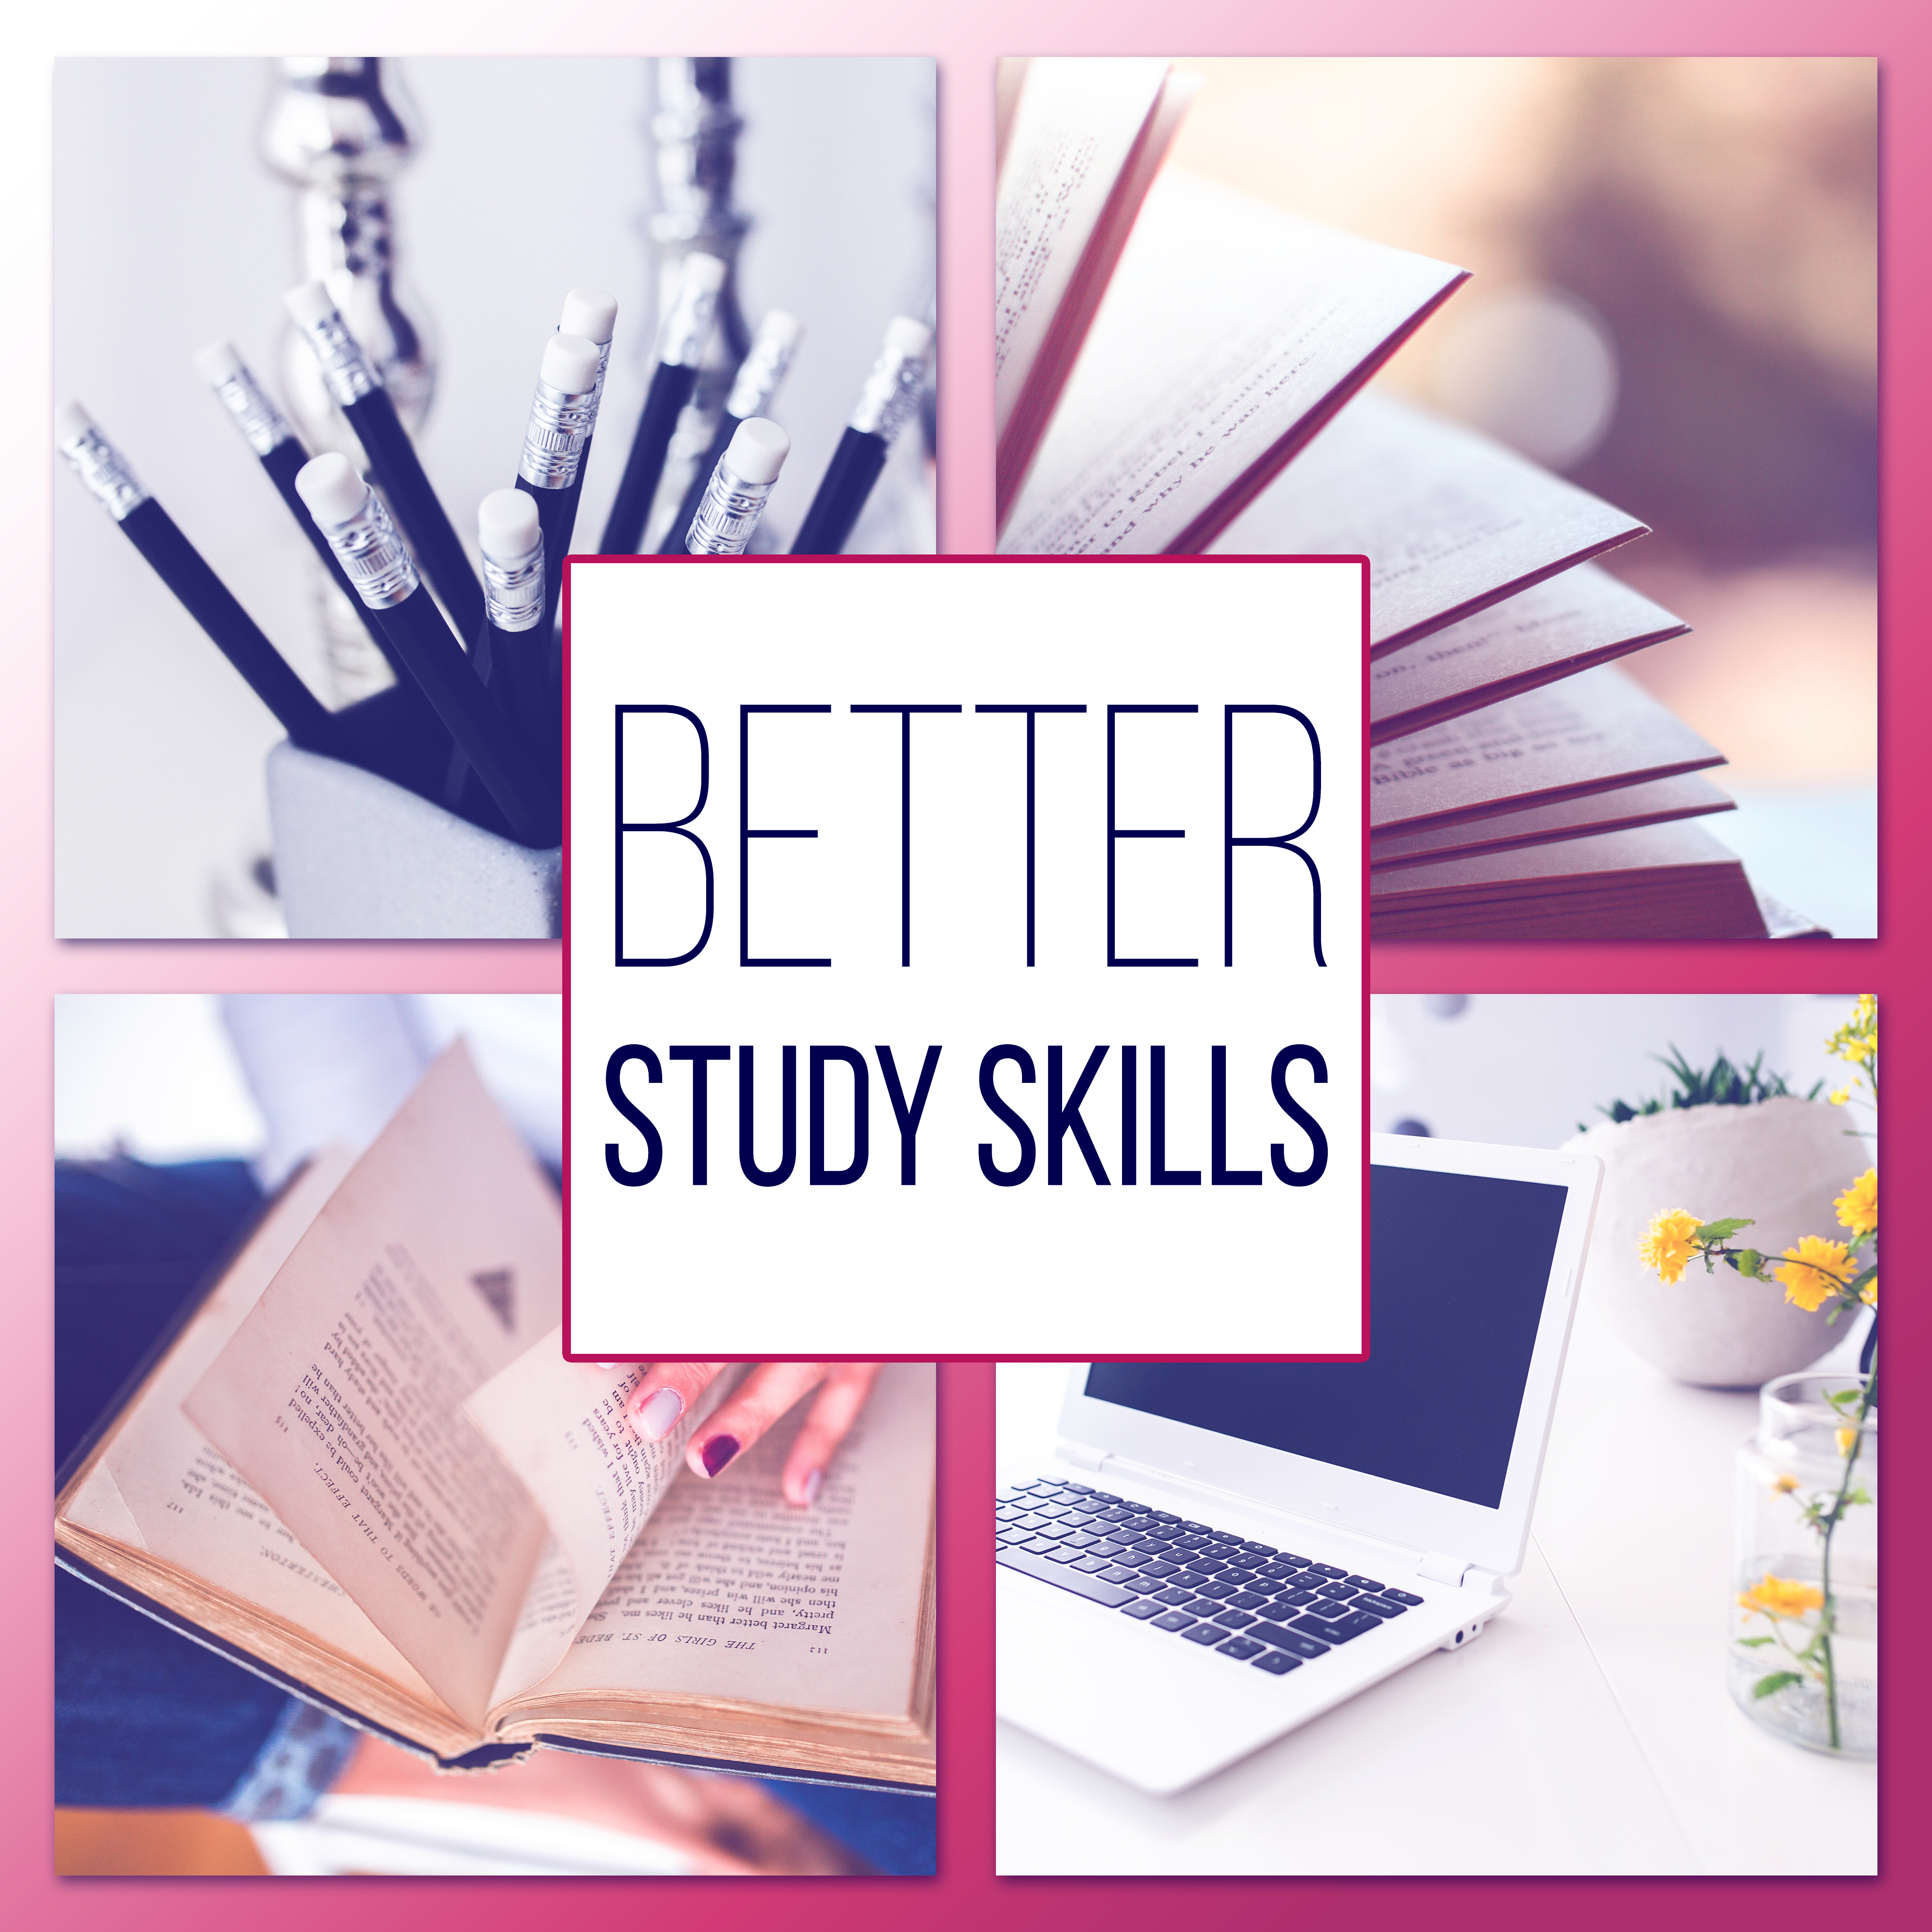 Better Study Skills  Active Listening, Background Study Music, Improve Memory and Concentration, Teaching Music to Students